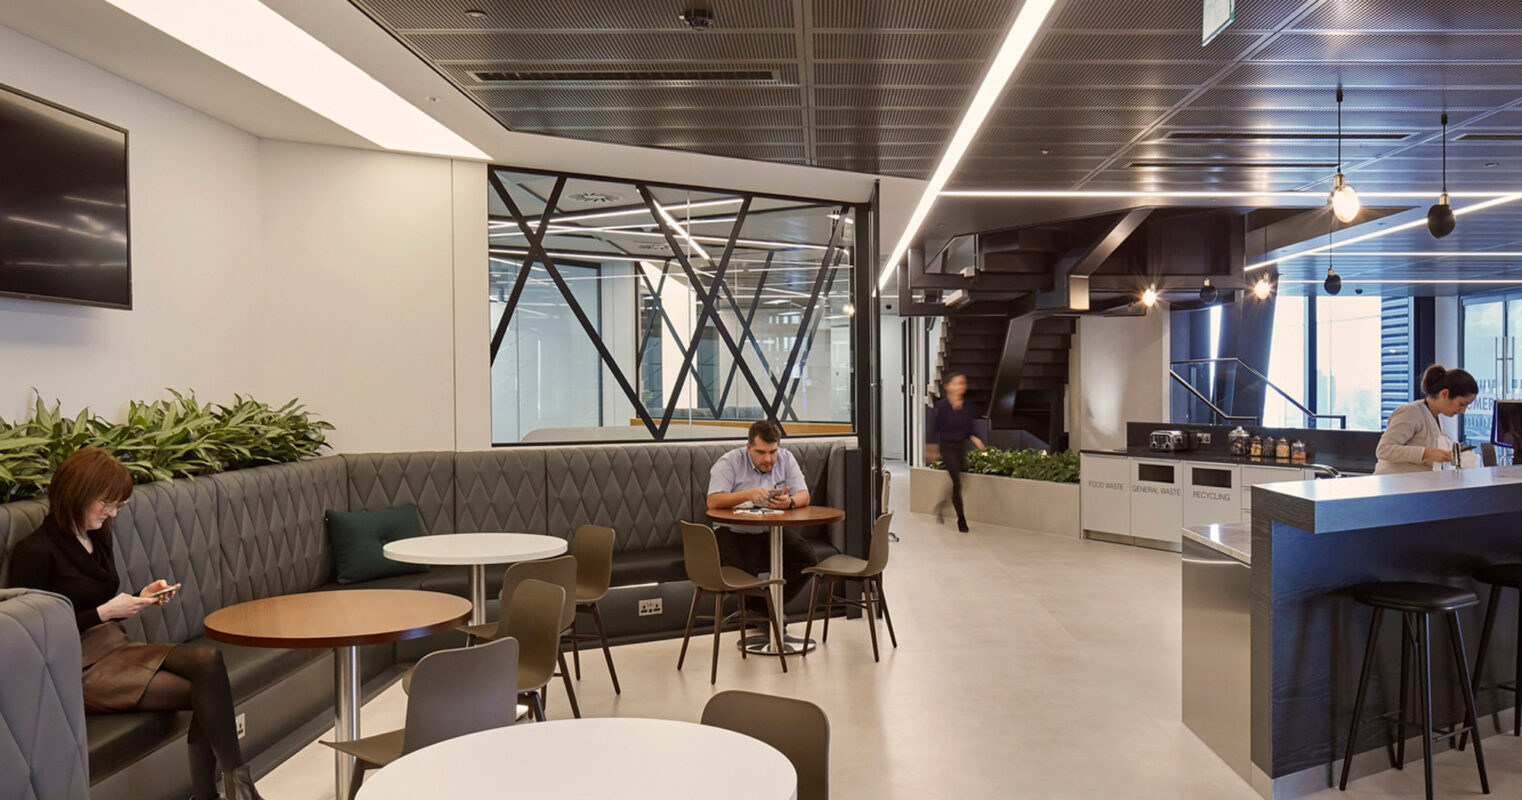 Modern office cafeteria with sleek furniture, pendant lighting, and a monochromatic color scheme, accented by vibrant green upholstery and plant life, creating a contemporary, inviting space for employees.